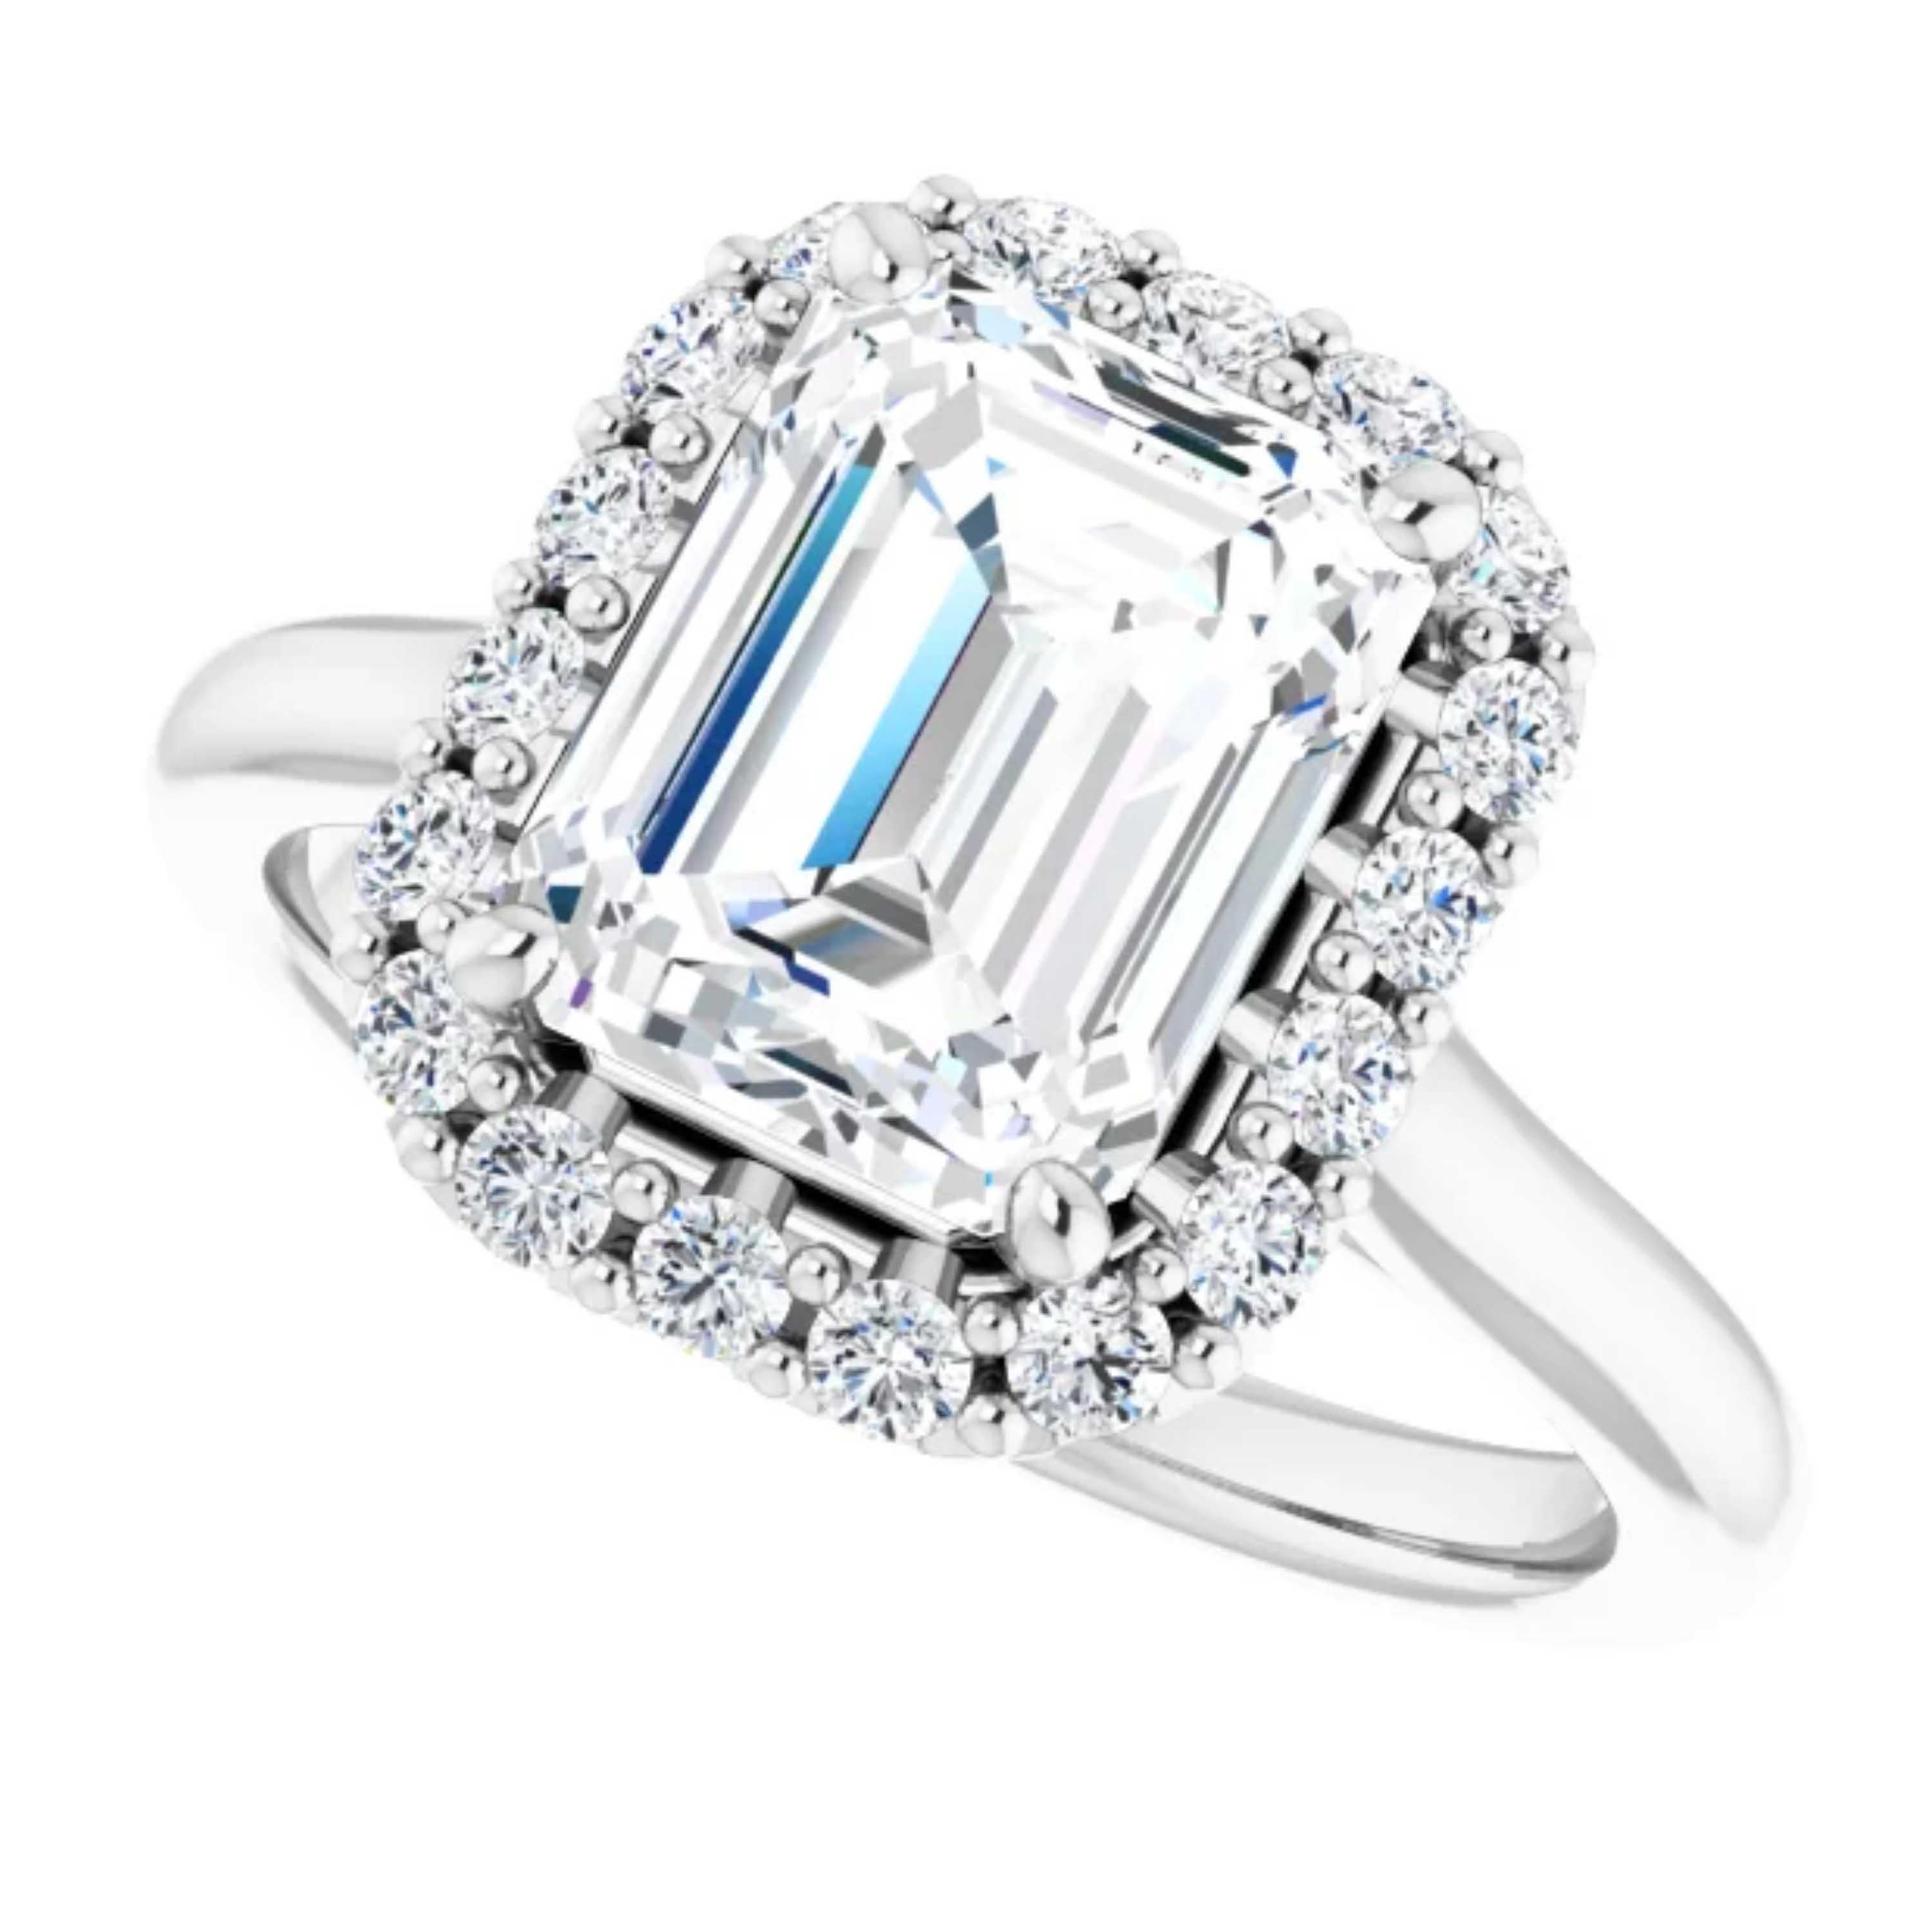 Halo Emerald Cut Diamond Engagement Ring White Gold In New Condition For Sale In Los Angeles, CA